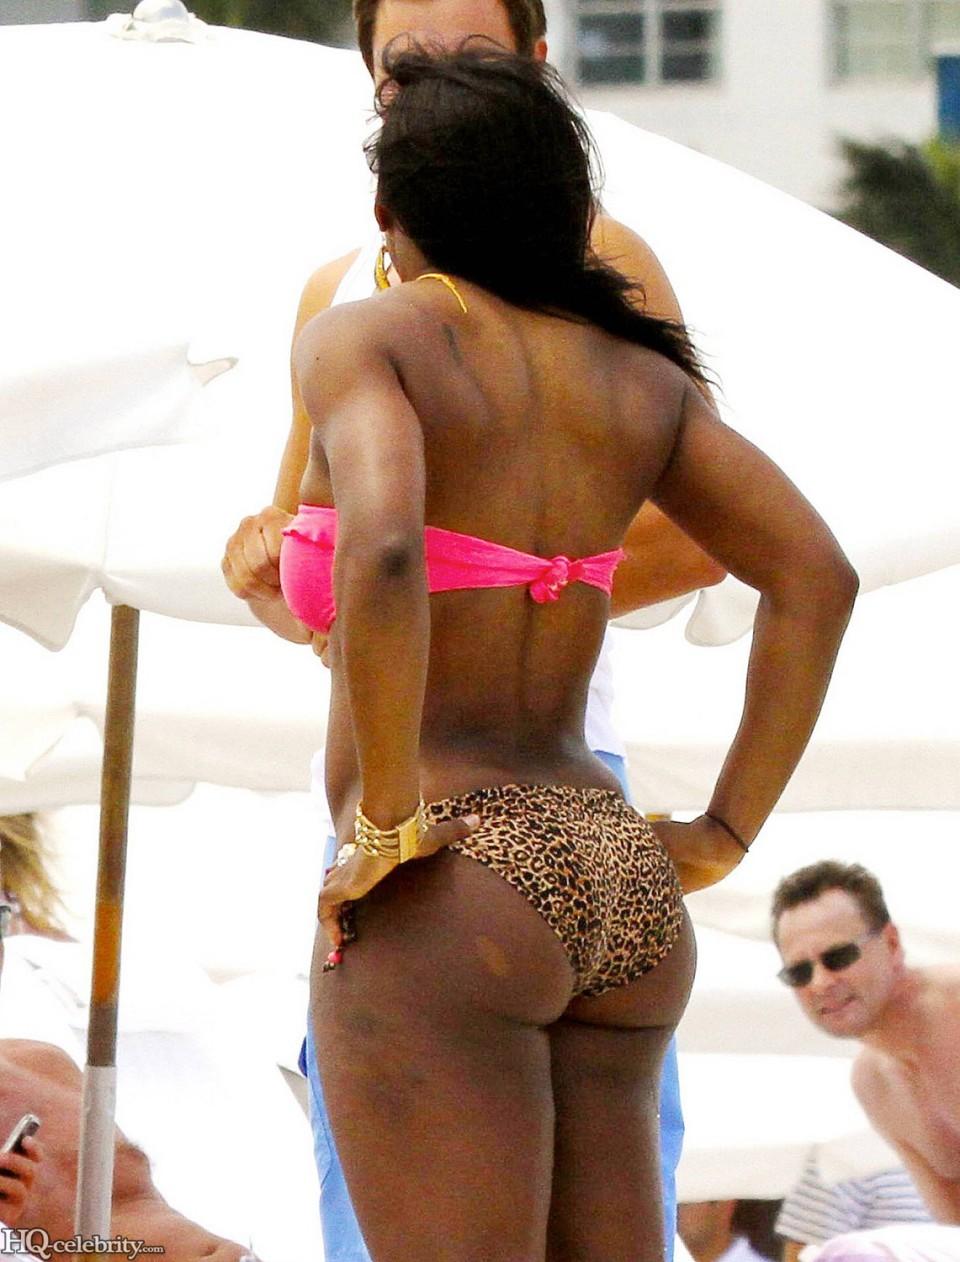 best of Booty serena nude williams